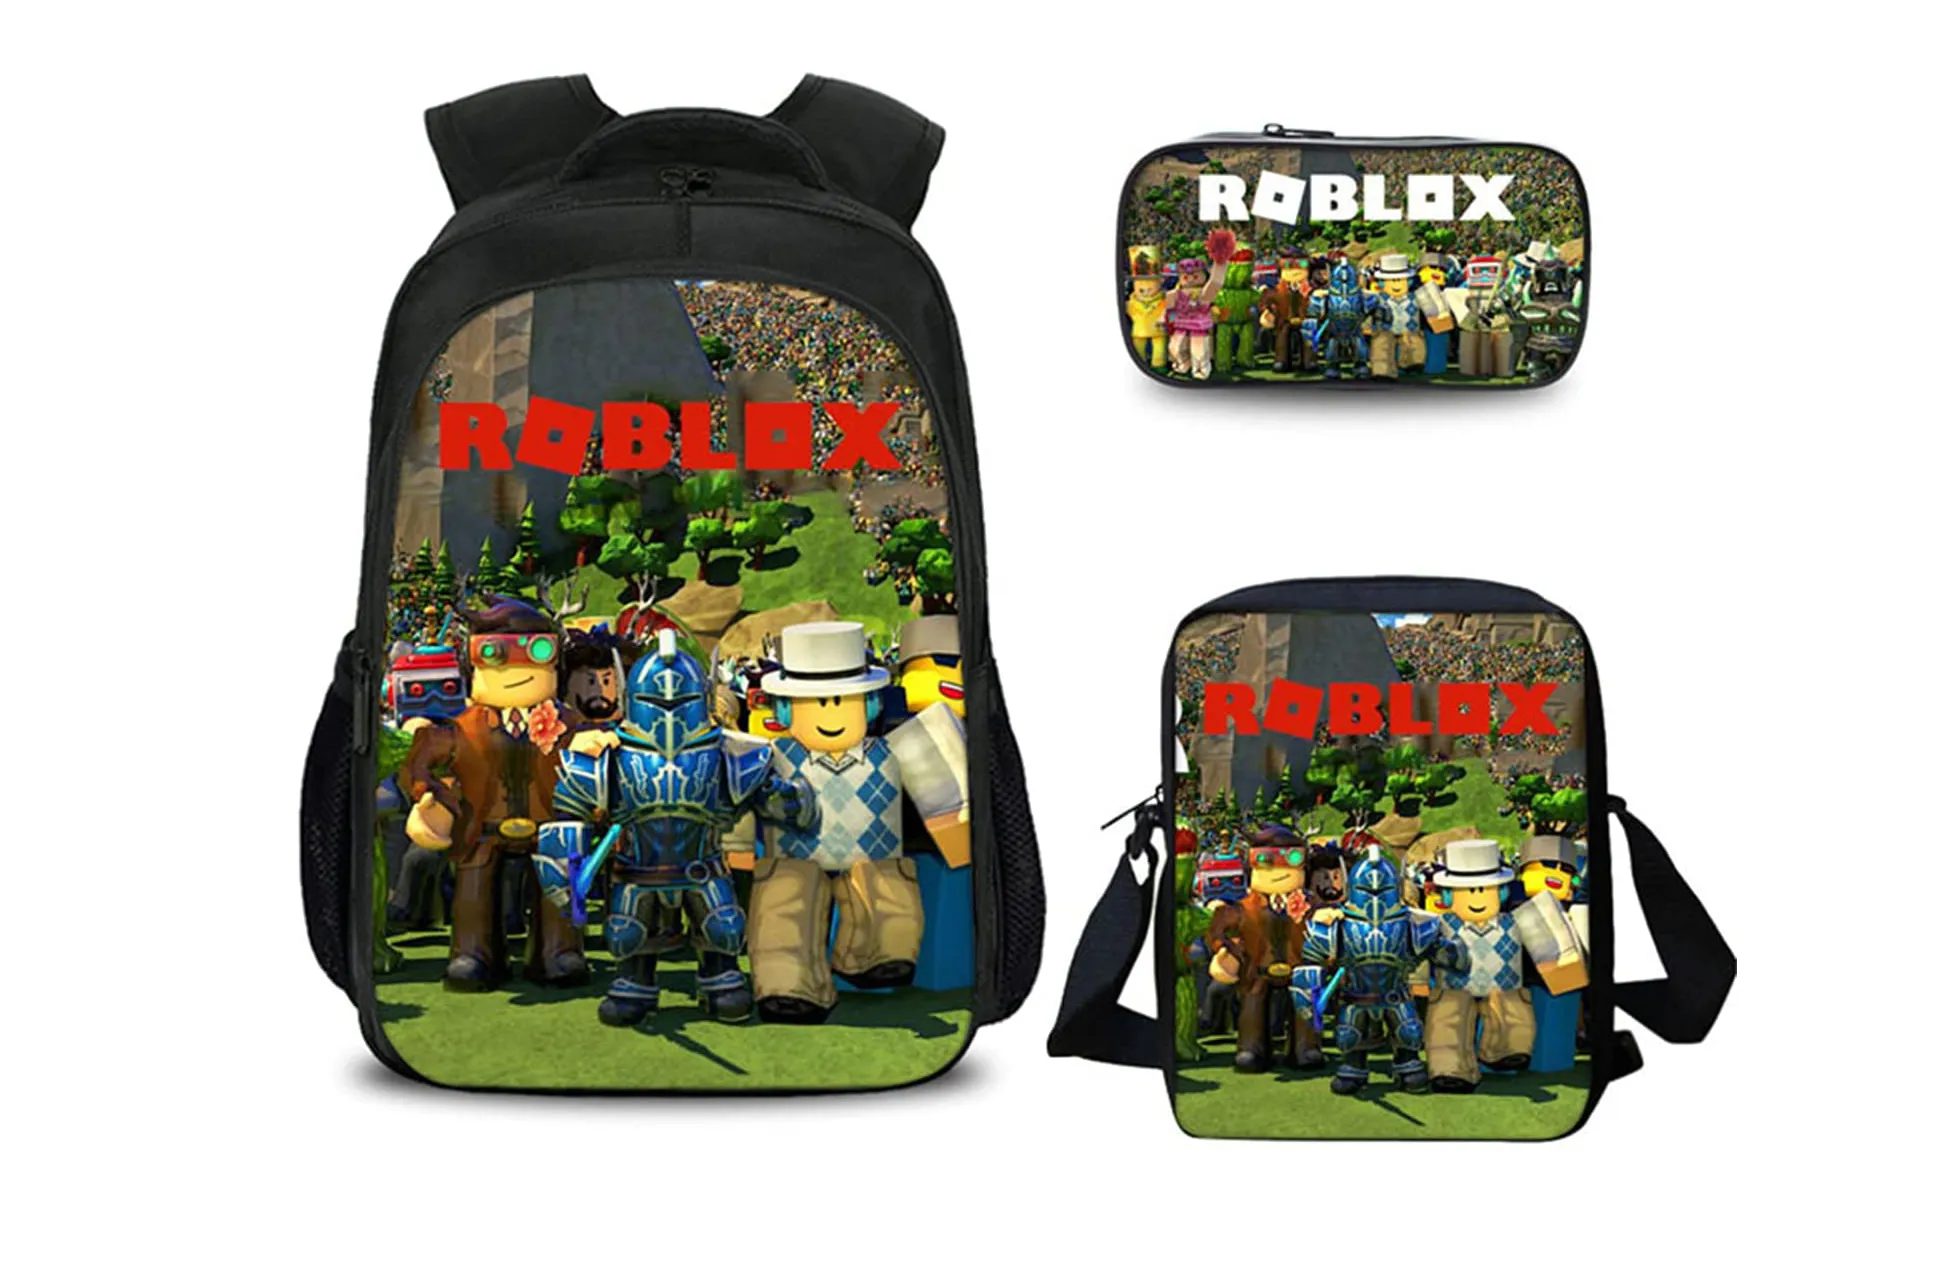 Roblox Promo Codes Gifts & Merchandise for Sale